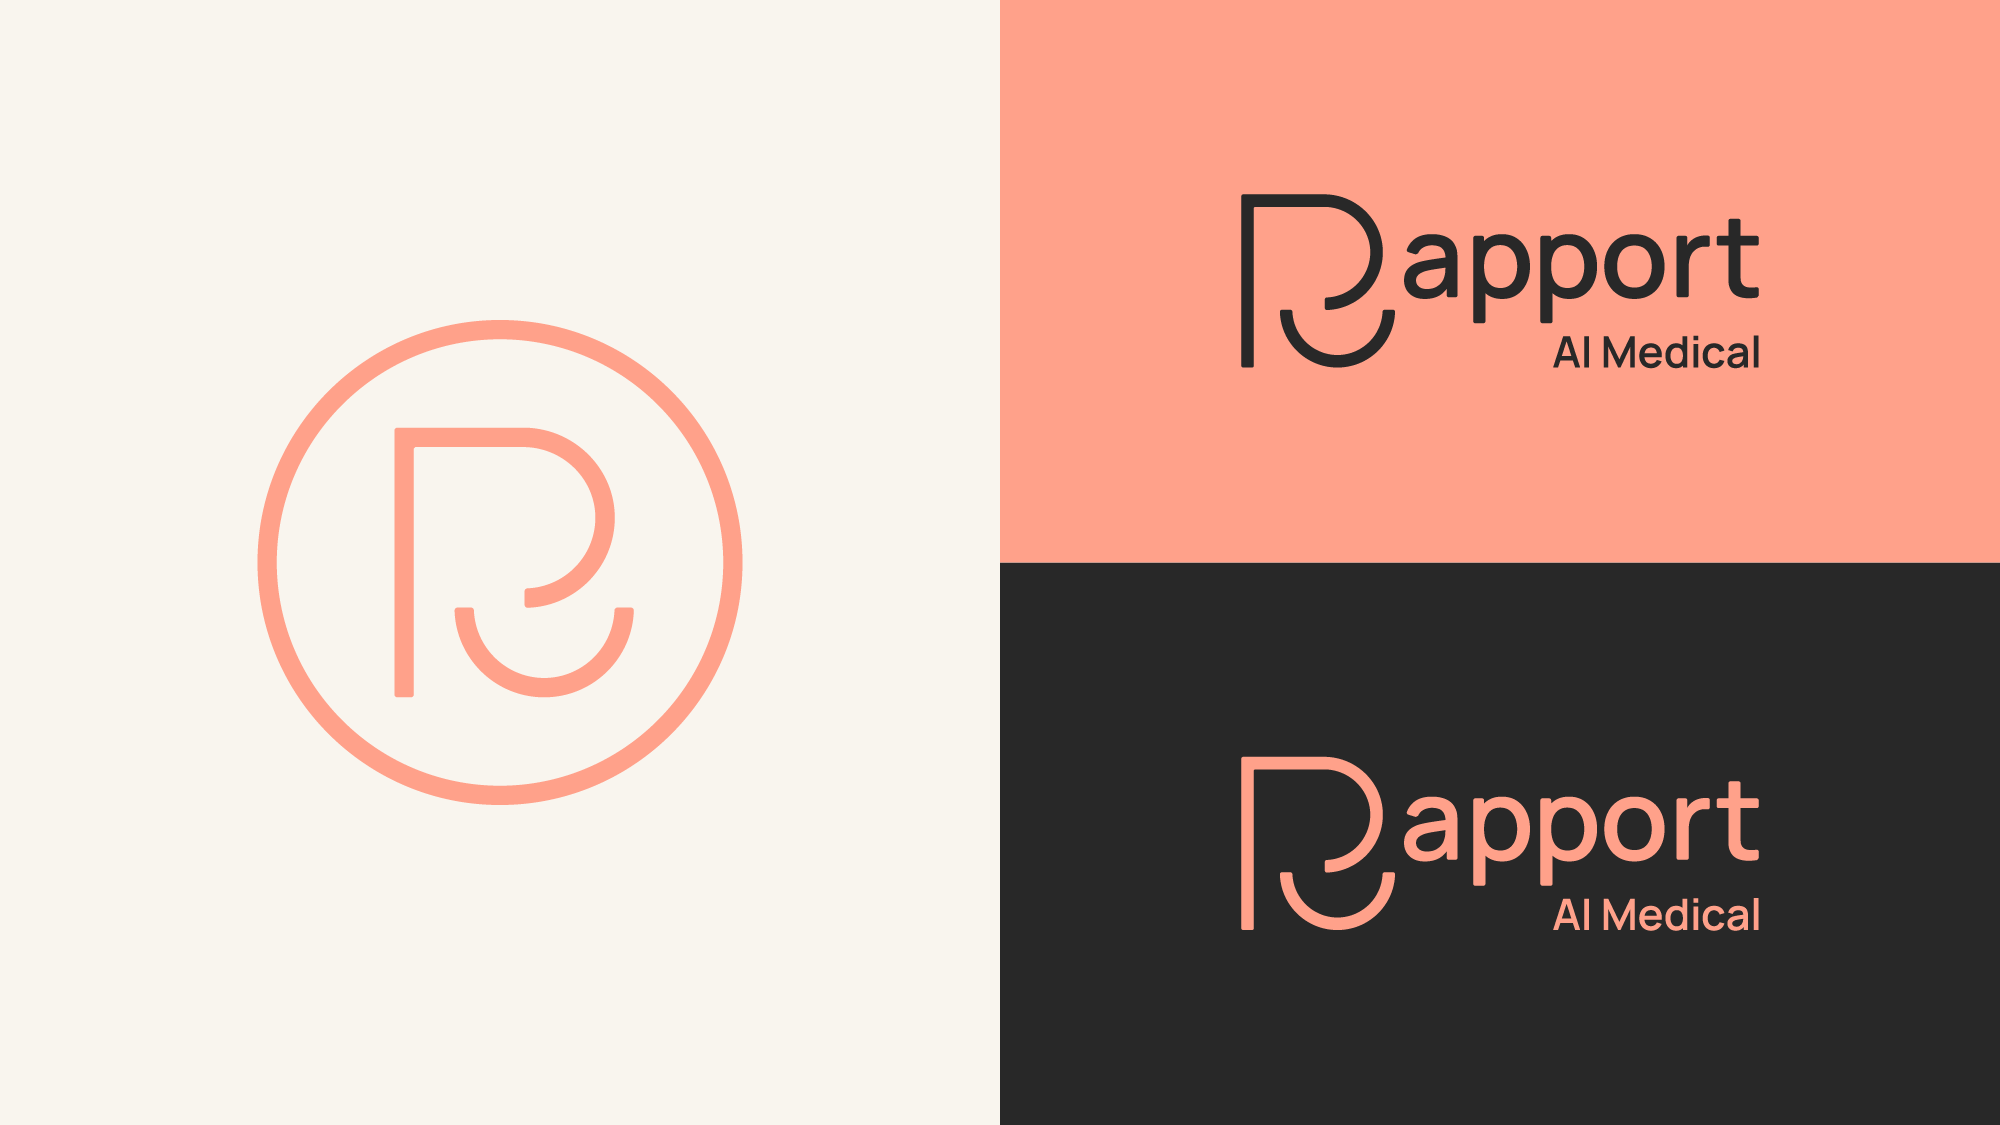 Logos against different color backgrounds